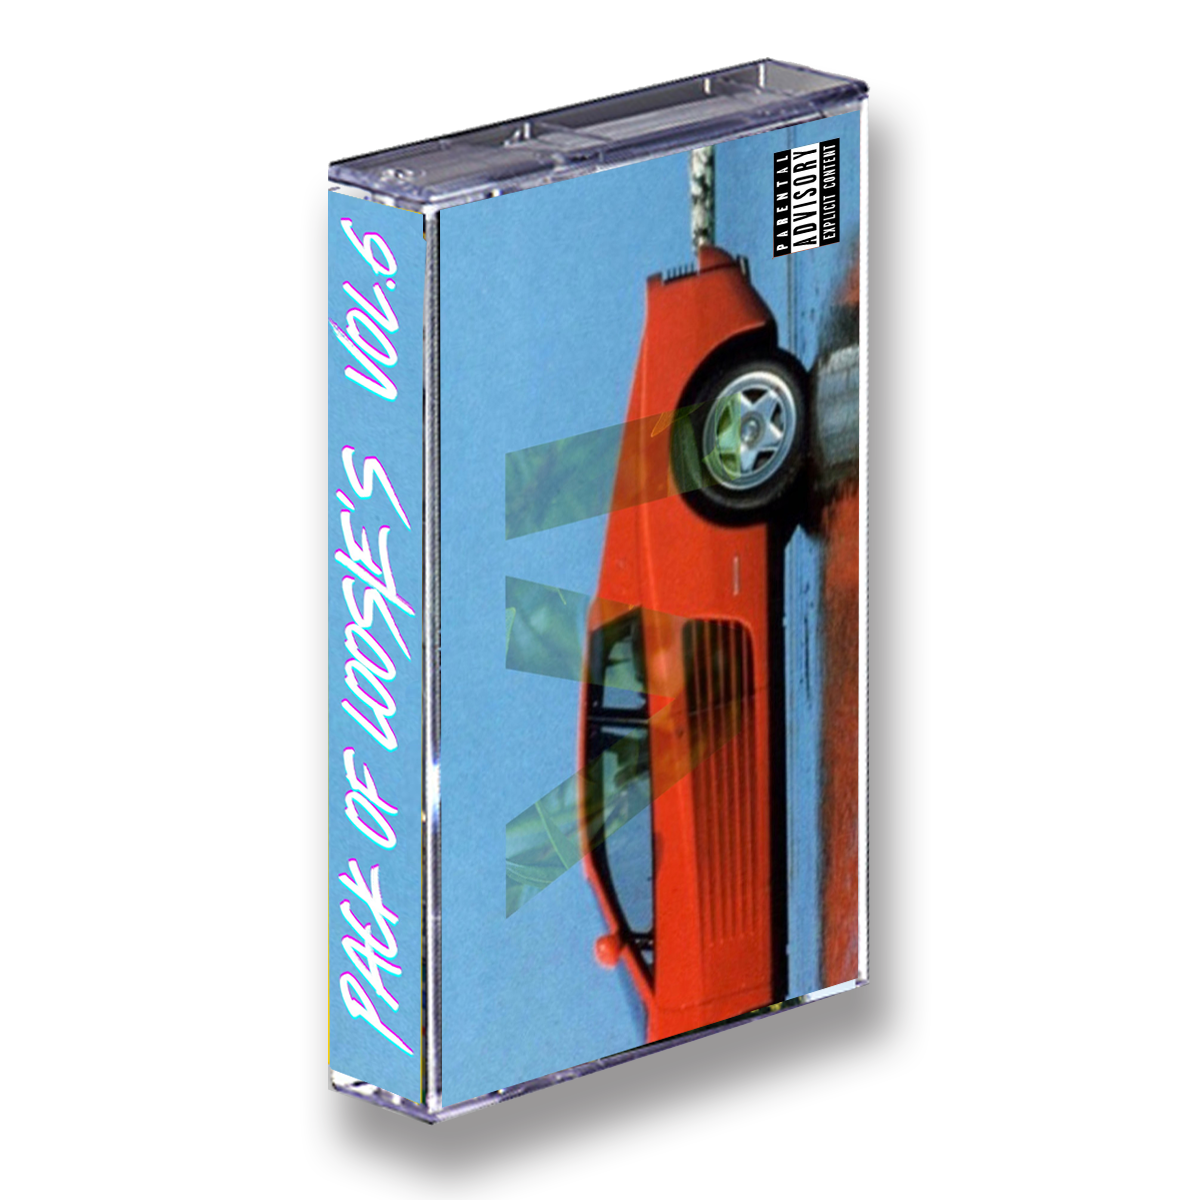 PACK OF LOOSIE'S VOL. 6 - Made to Order Cassette